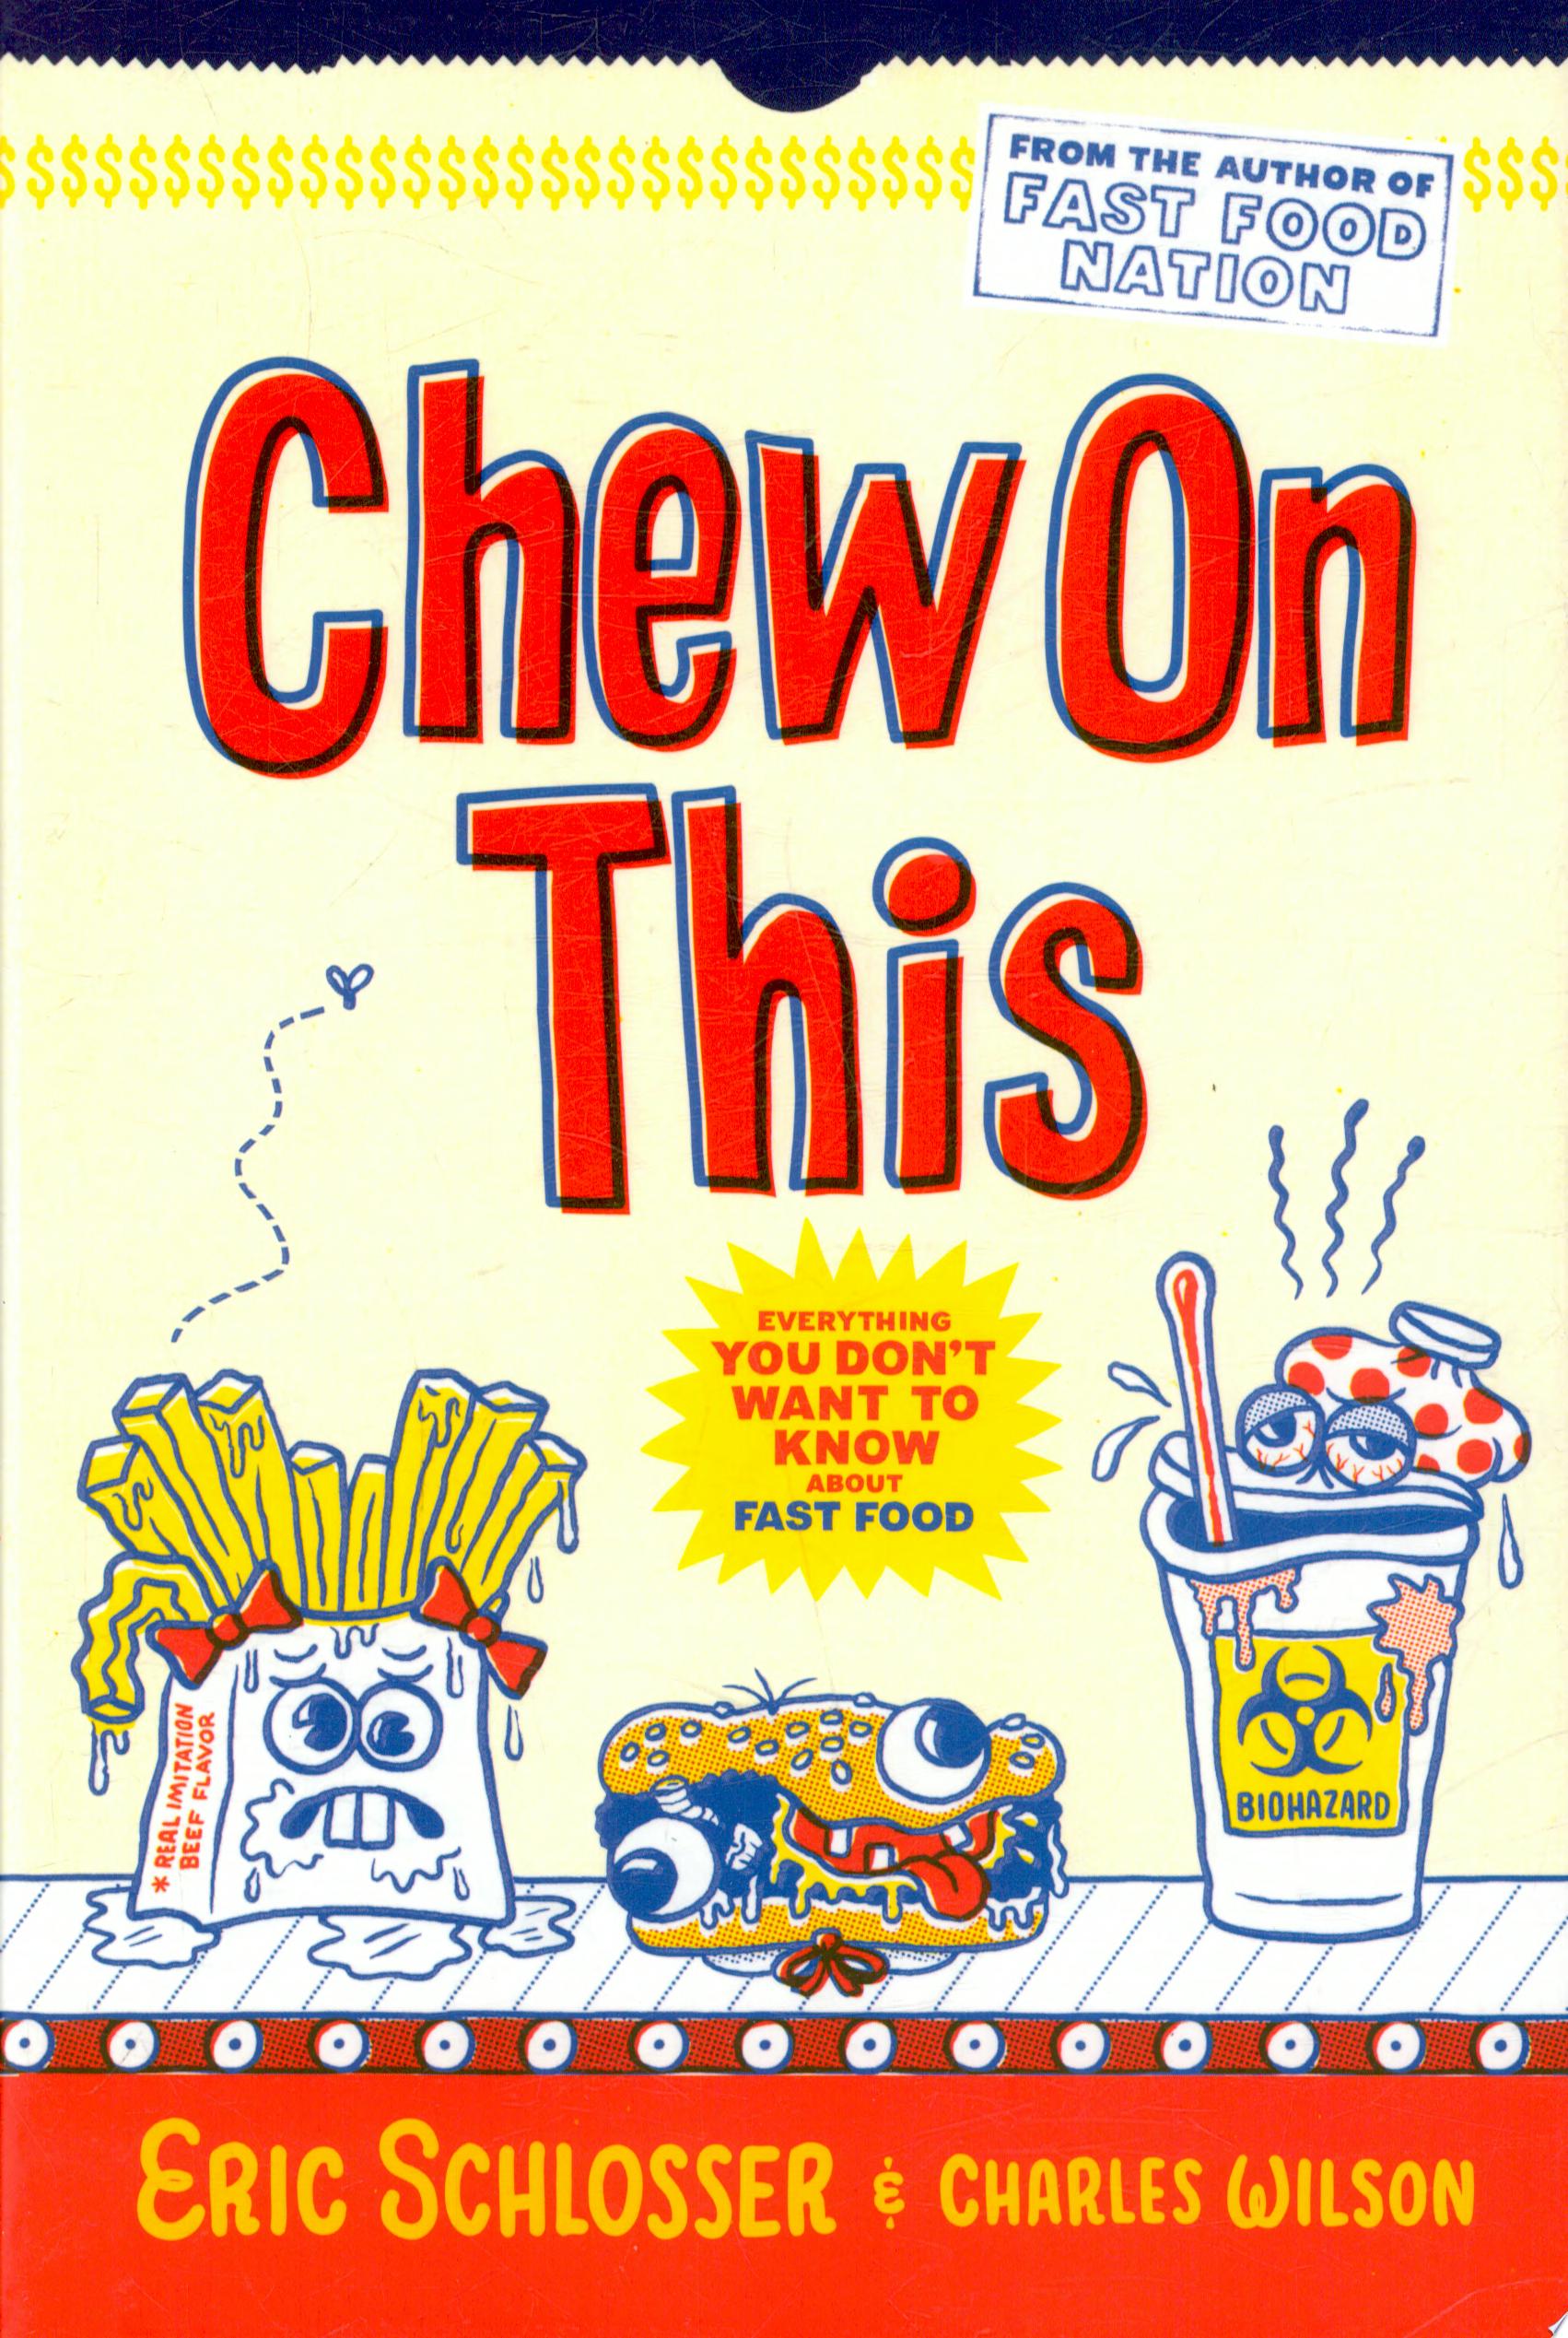 Image for "Chew on this"